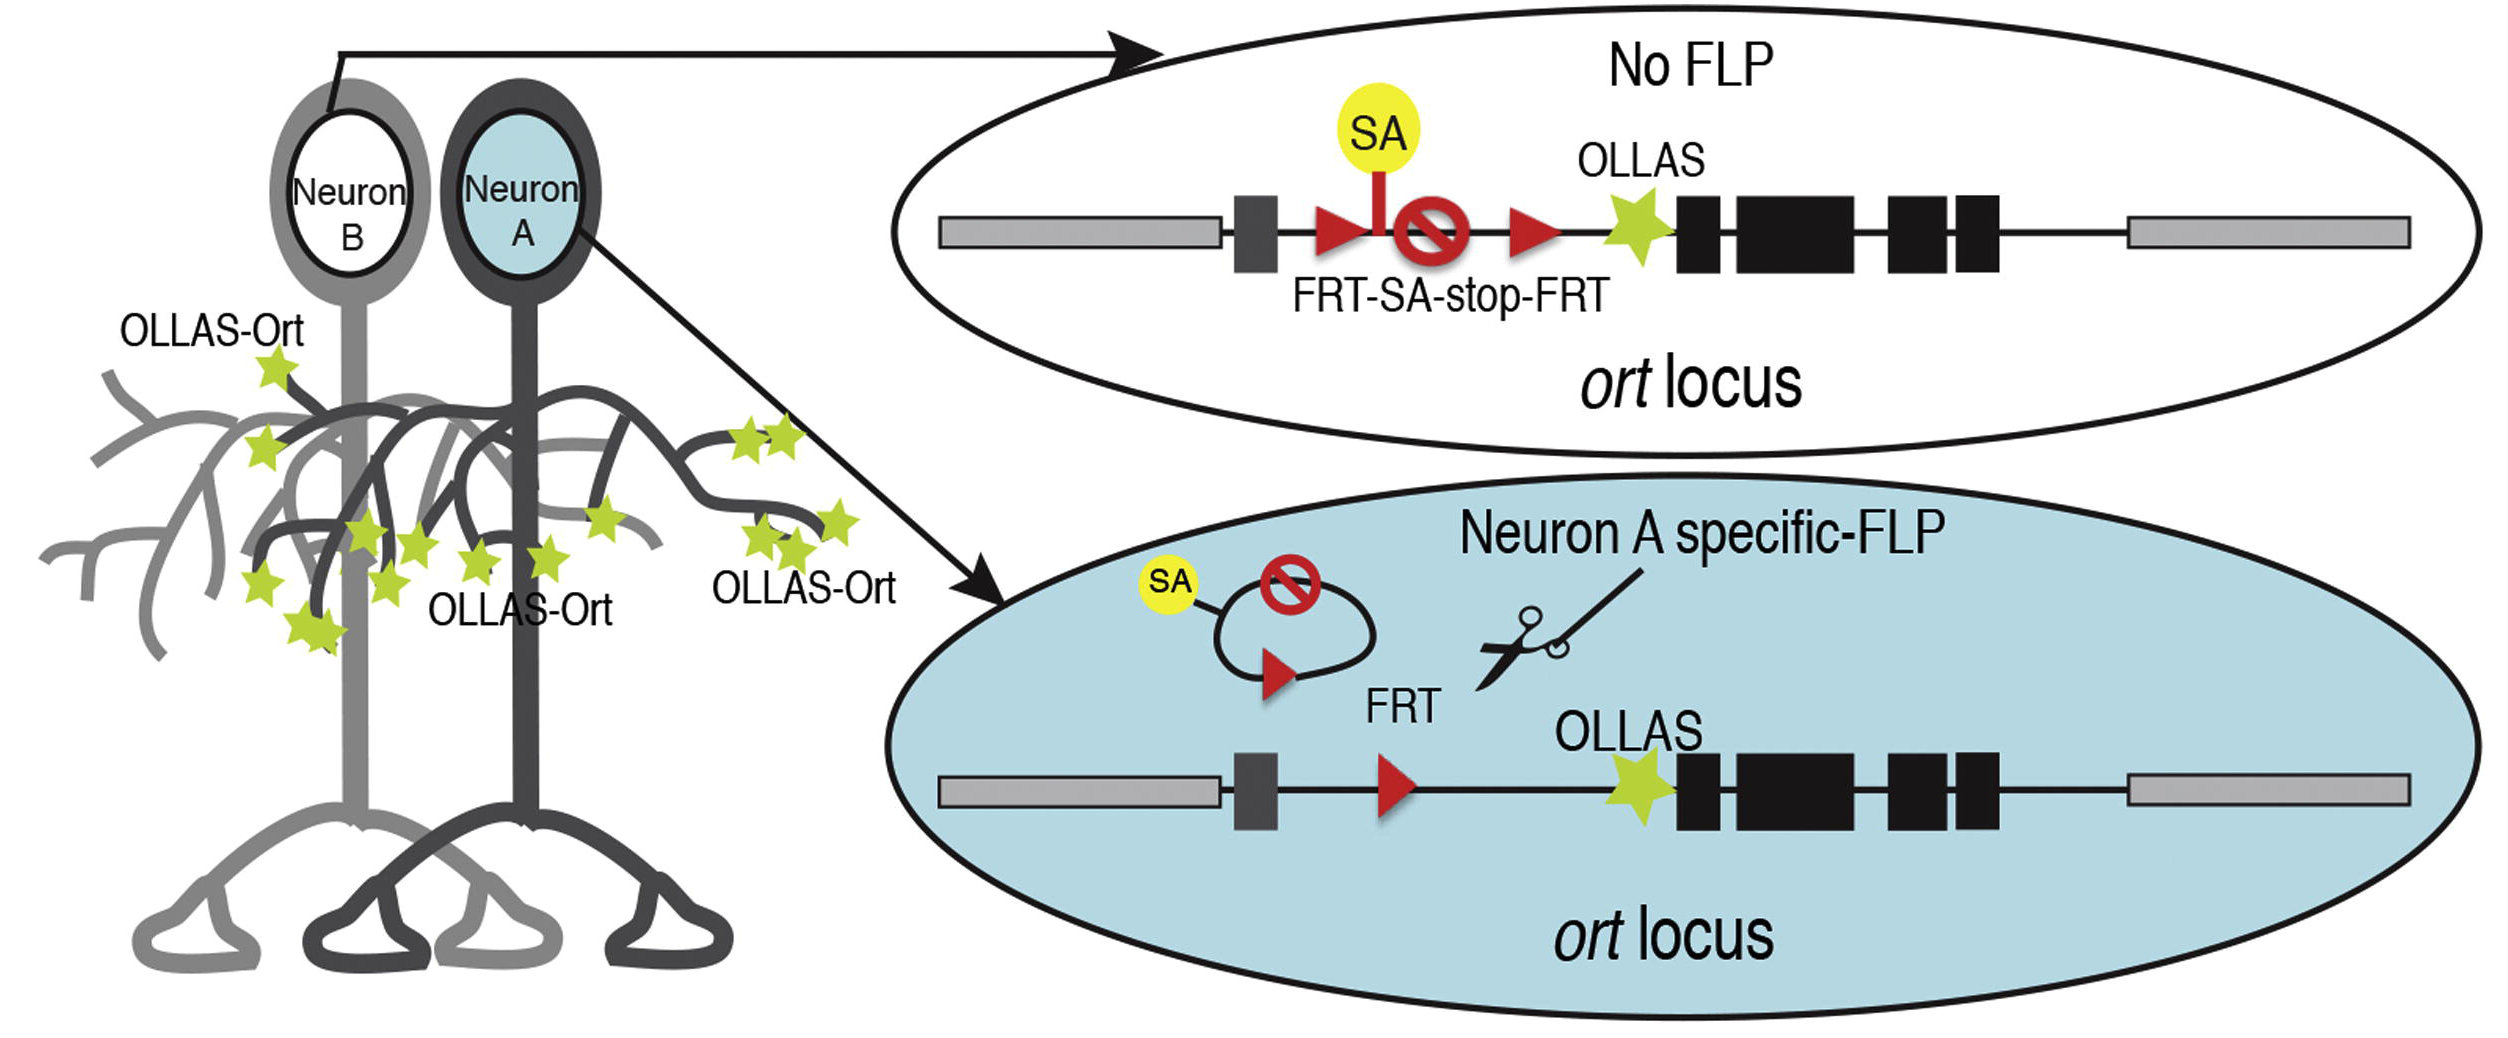 Figure of STaR postsynaptic marking from Chen et al. (2013), Cell-type-Specific Labeling of Synapses In Vivo through Synaptic Tagging with Recombination. Neuron 81: 280–293.